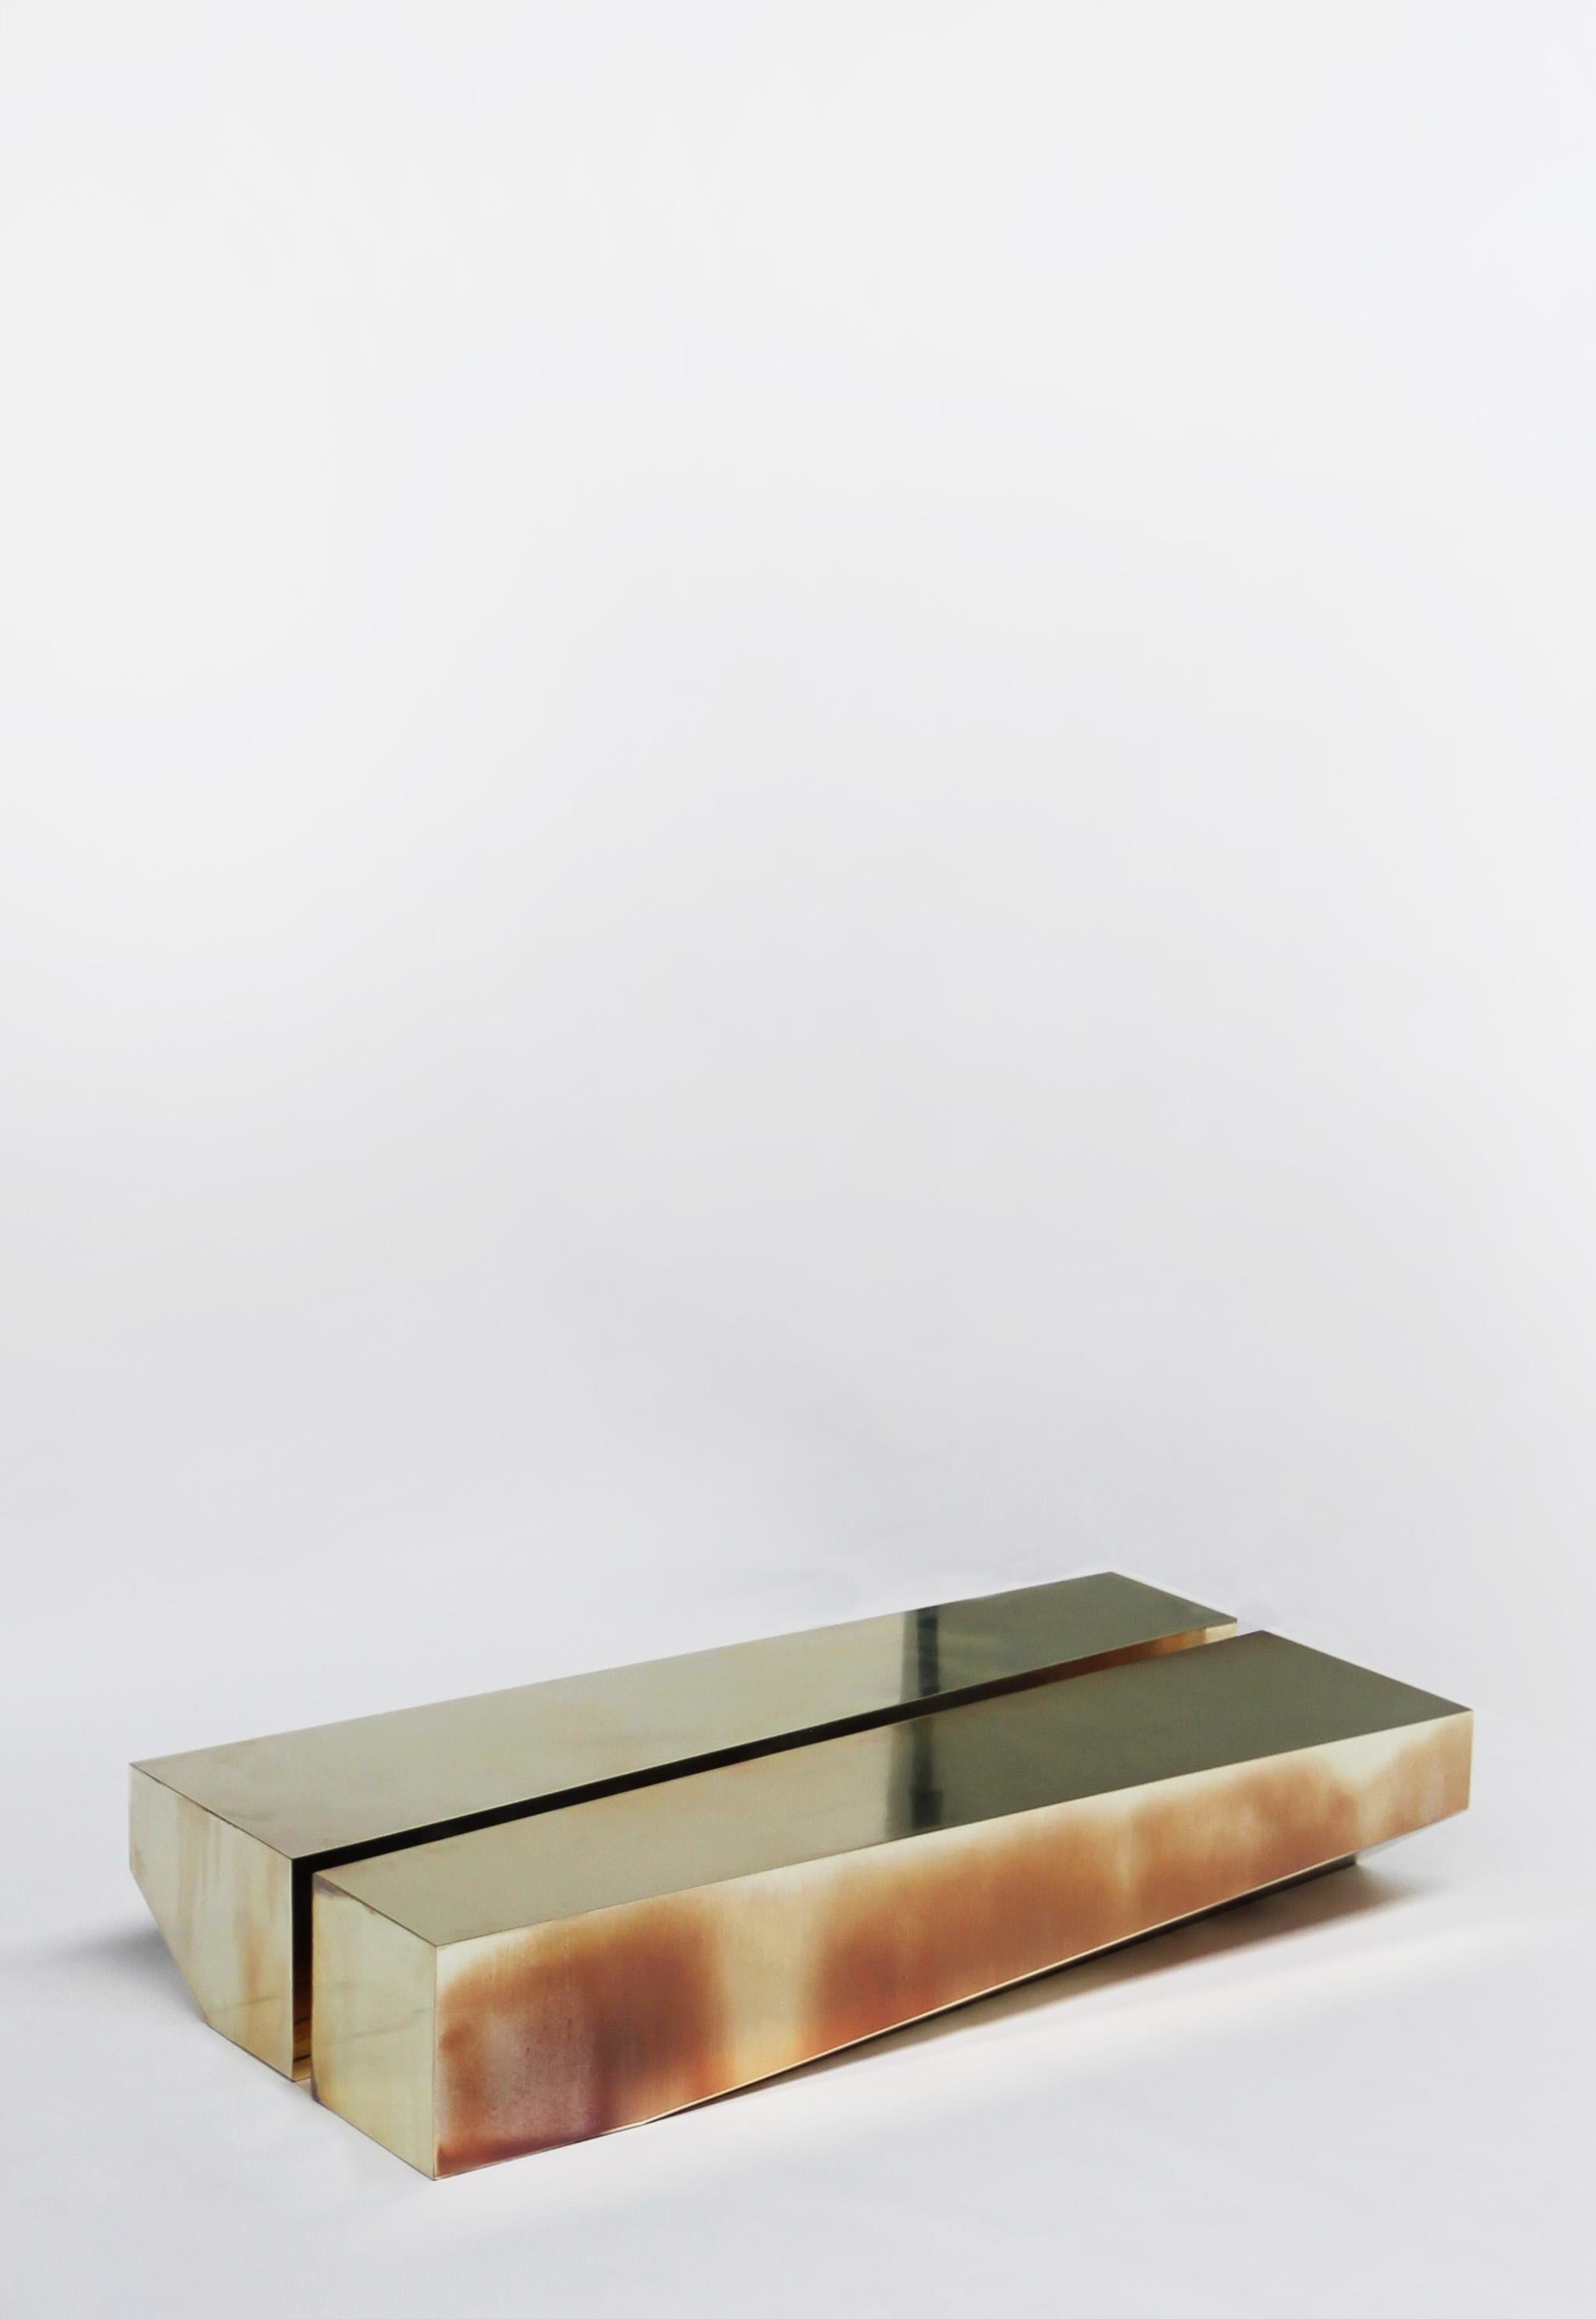 Bevel Coffee Table by ​Hadge
Limited Edition of 10
Dimensions: D 39 x W 150 x H 26 cm.
Materials: Steel polished chrome bronze brass 

Weathered by hand (unique pieces).

HADGE - an architecture I interior practice founded in 2020 by architect